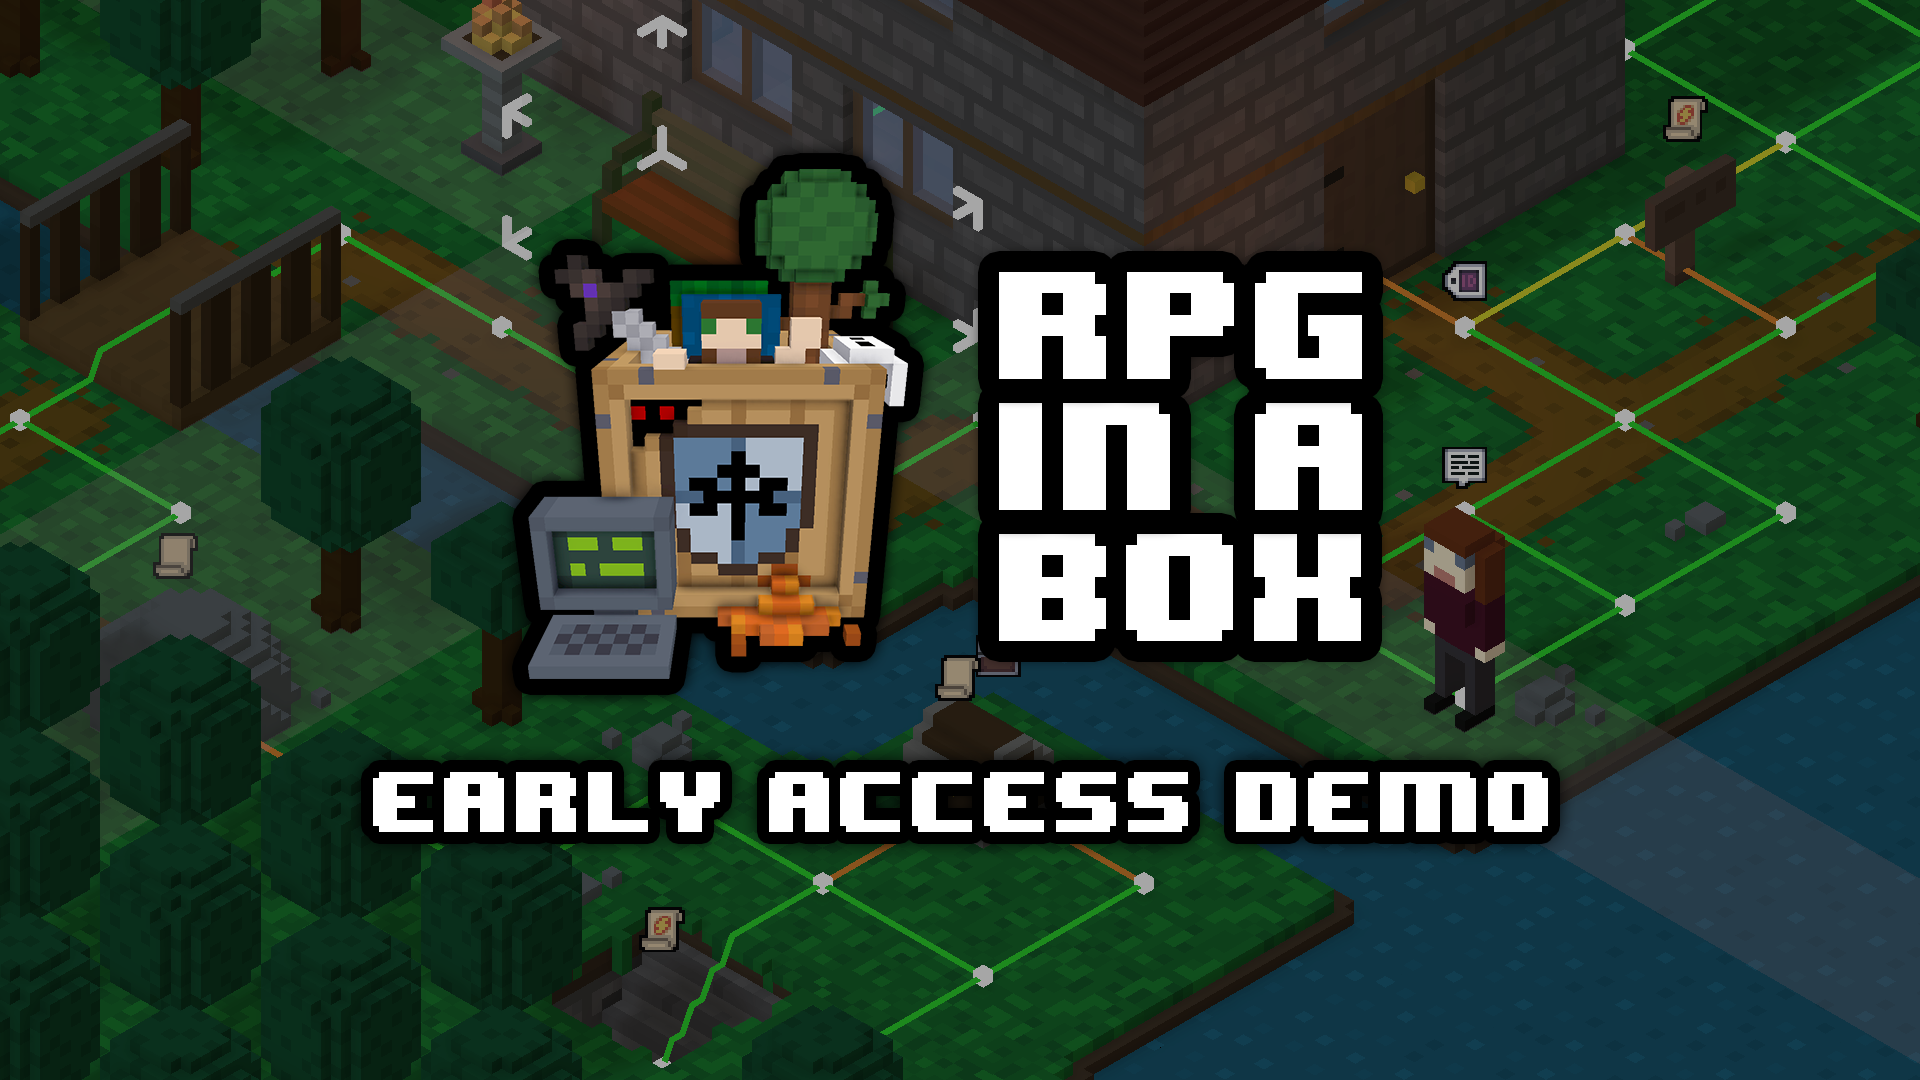 Come join the official RPG in a Box forum! : r/rpginabox